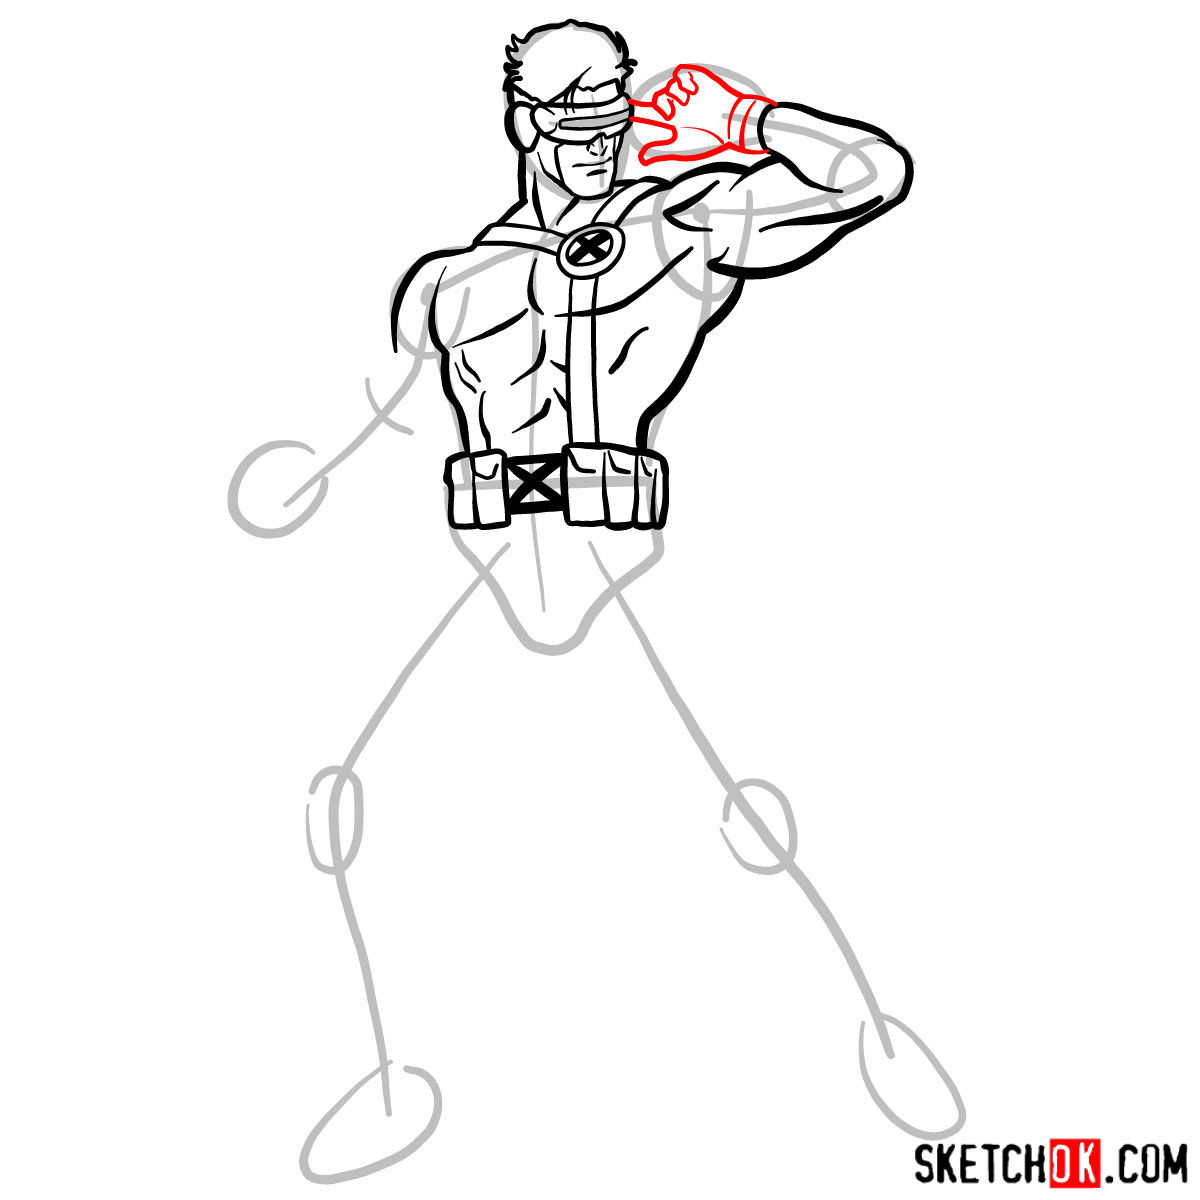 How to draw Cyclops from X-Men - step 11